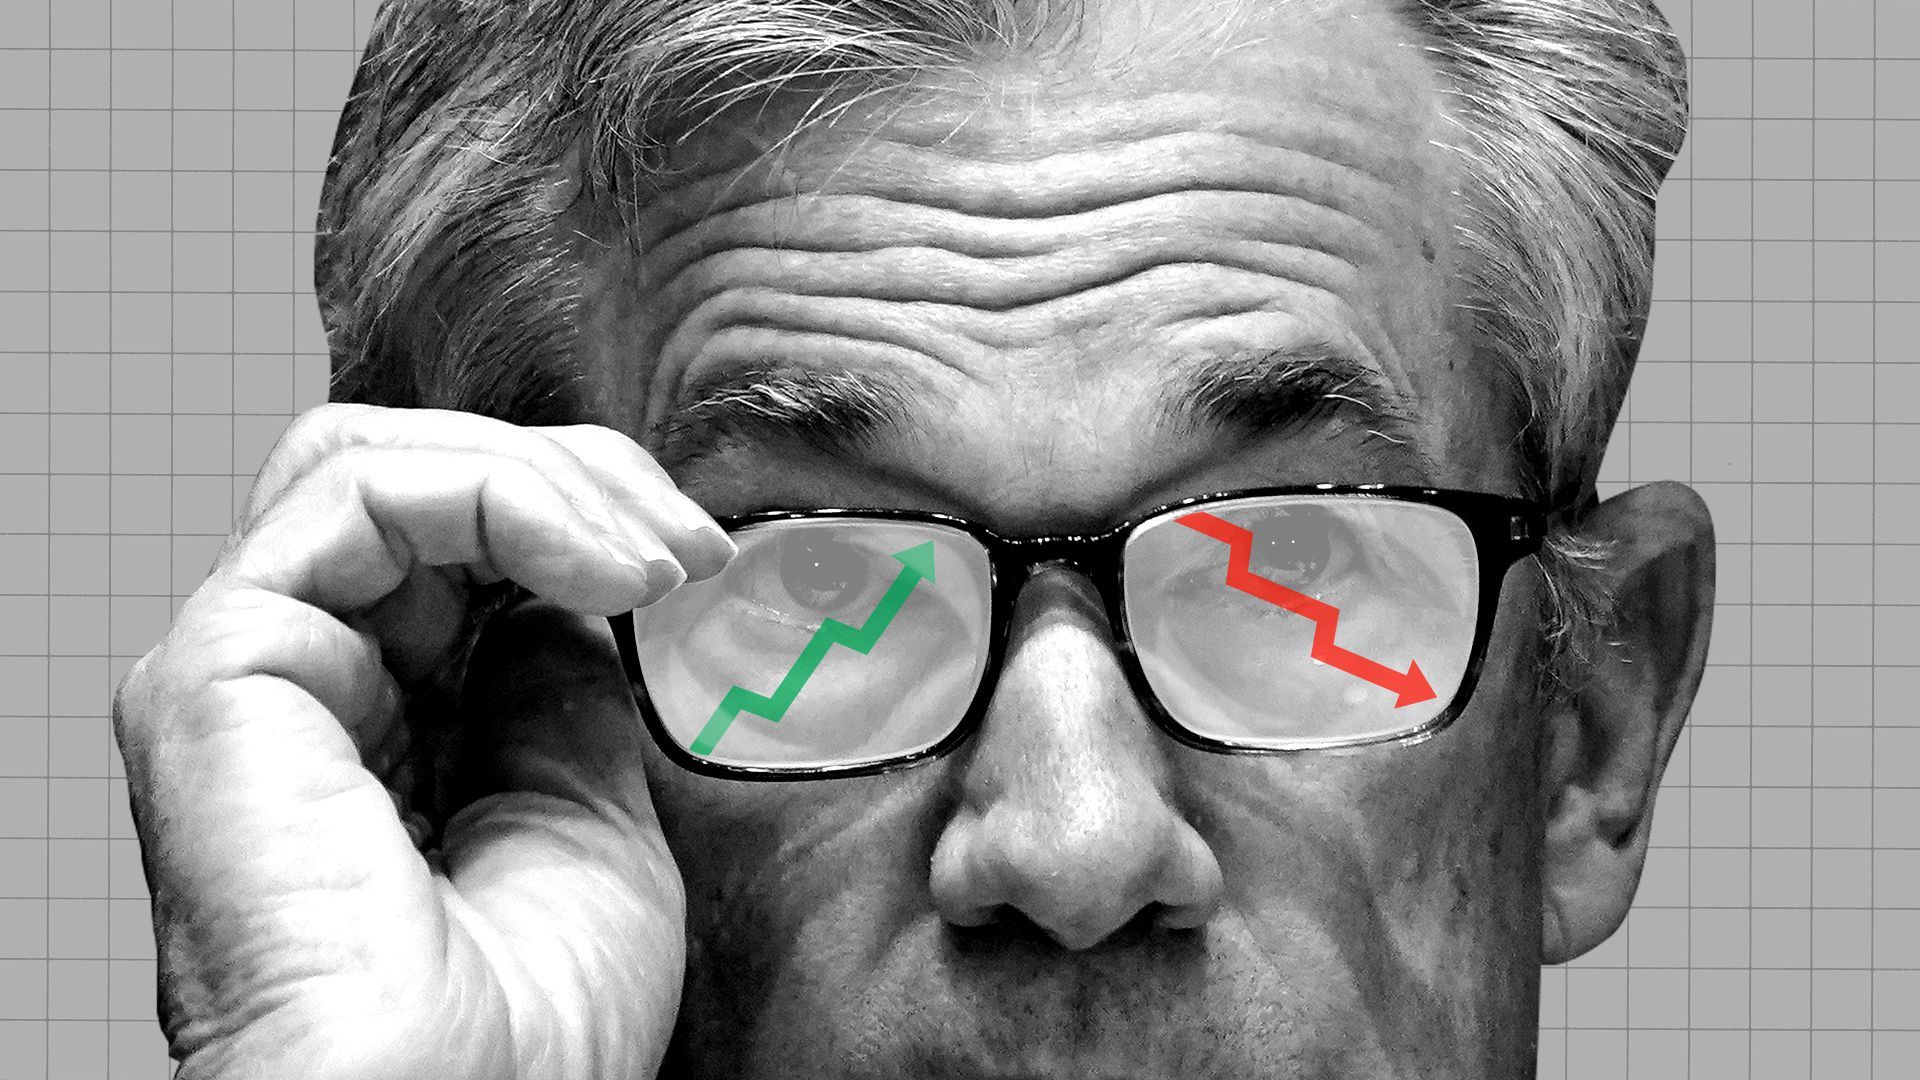 Photo illustration of Jerome Powell wearing glasses with a reflection of an upward trend line and a downward trend line in his glasses.